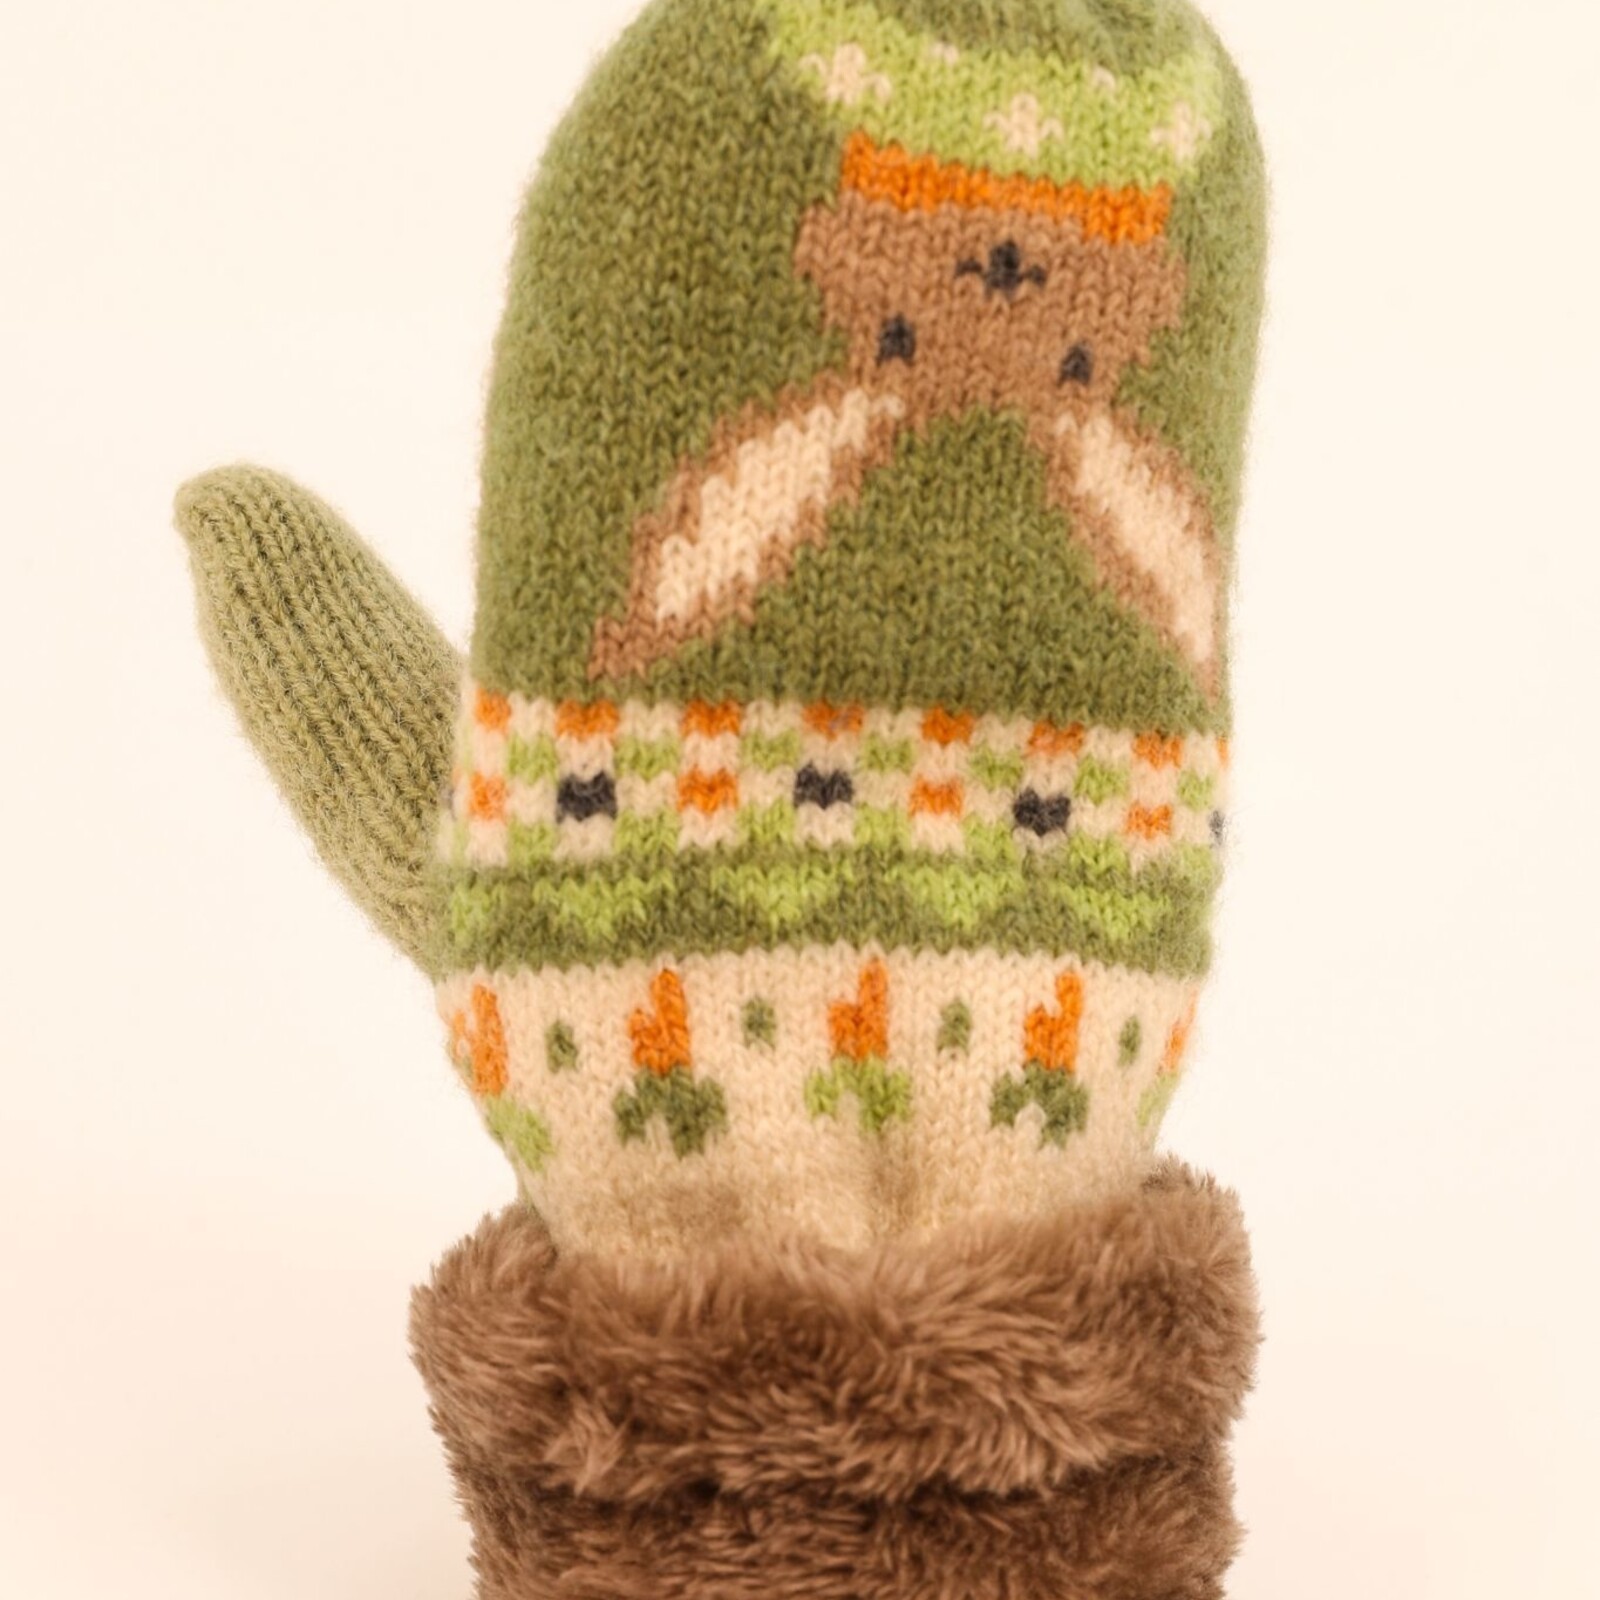 Petite Powder Kids Knitted Mittens-Bunny/Carrot  COS94 loading=